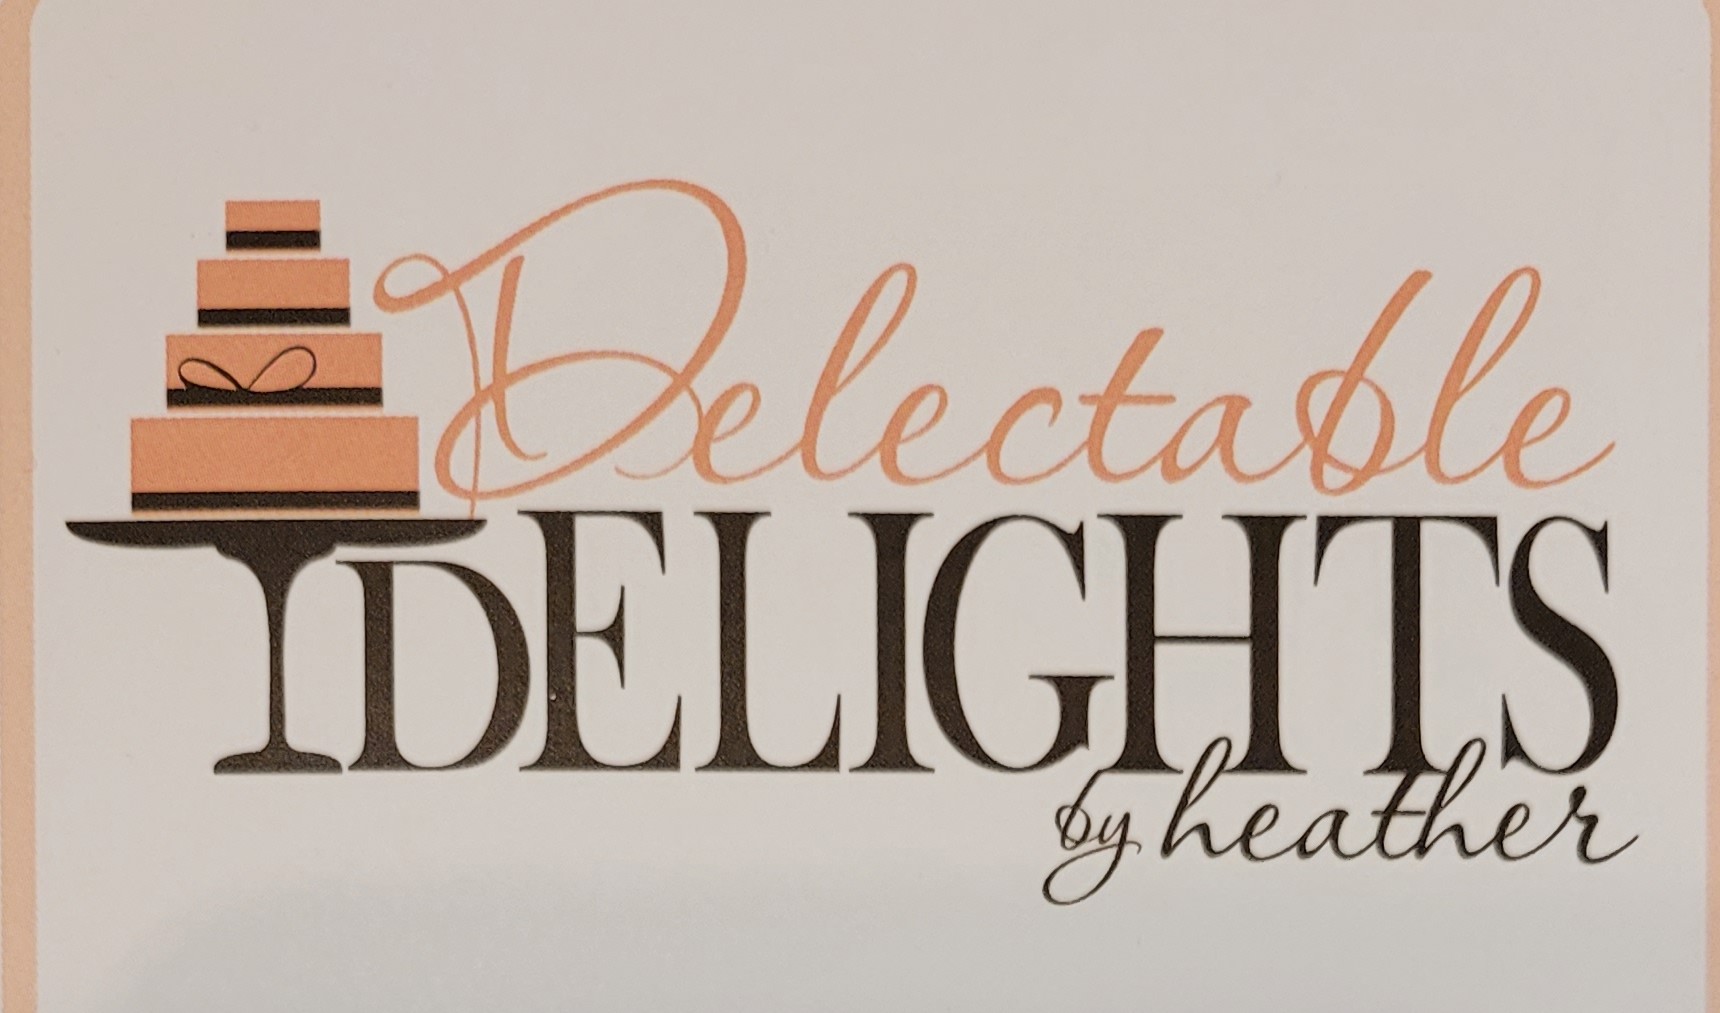 Delectable Delights by Heather